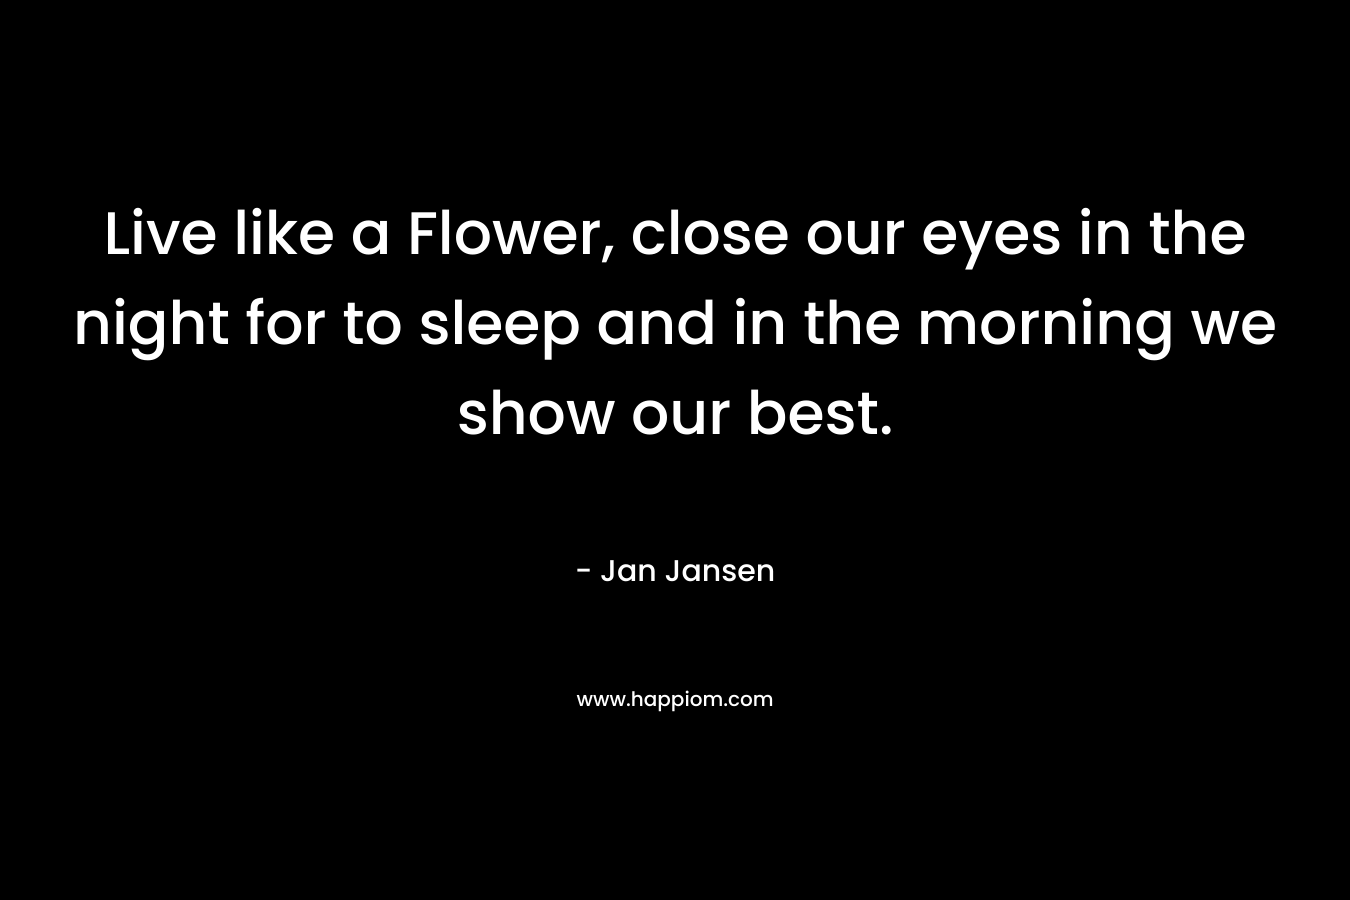 Live like a Flower, close our eyes in the night for to sleep and in the morning we show our best. – Jan Jansen